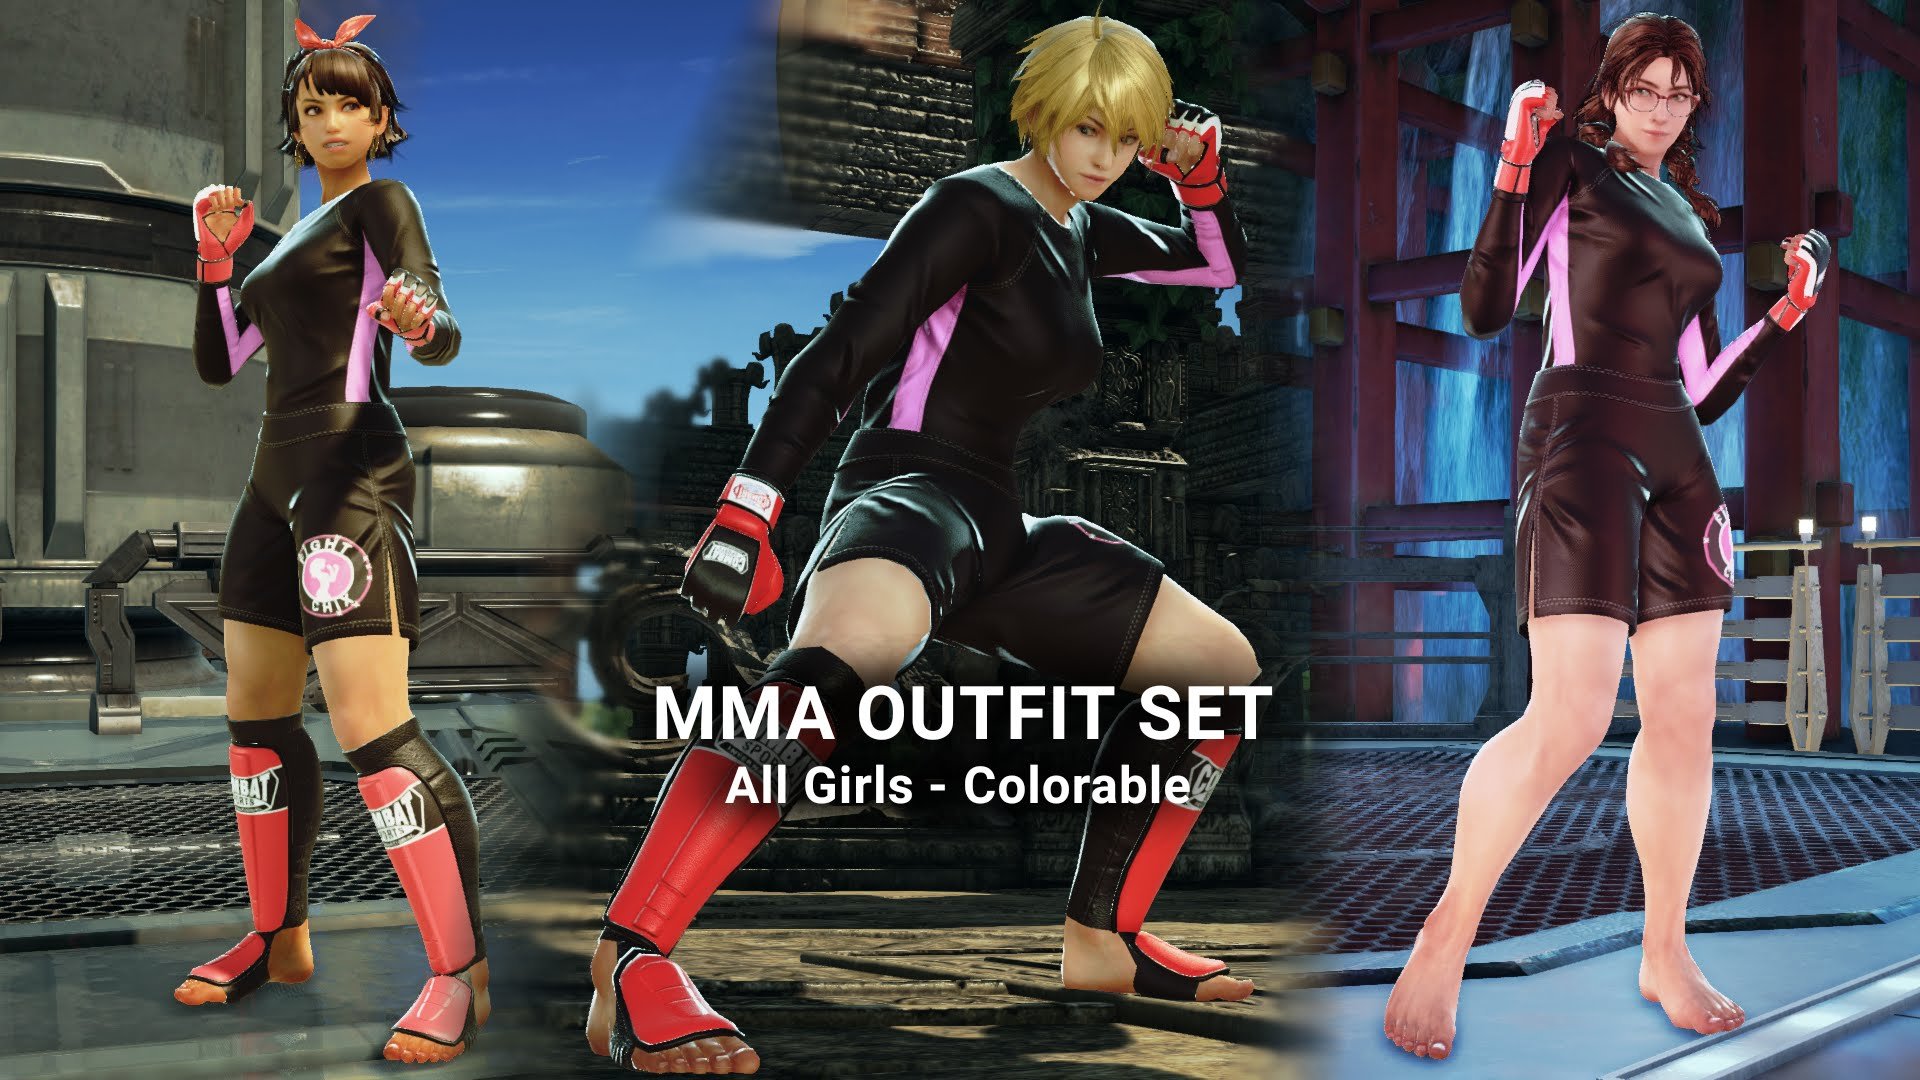 MMA OUTFIT SET - All Girls